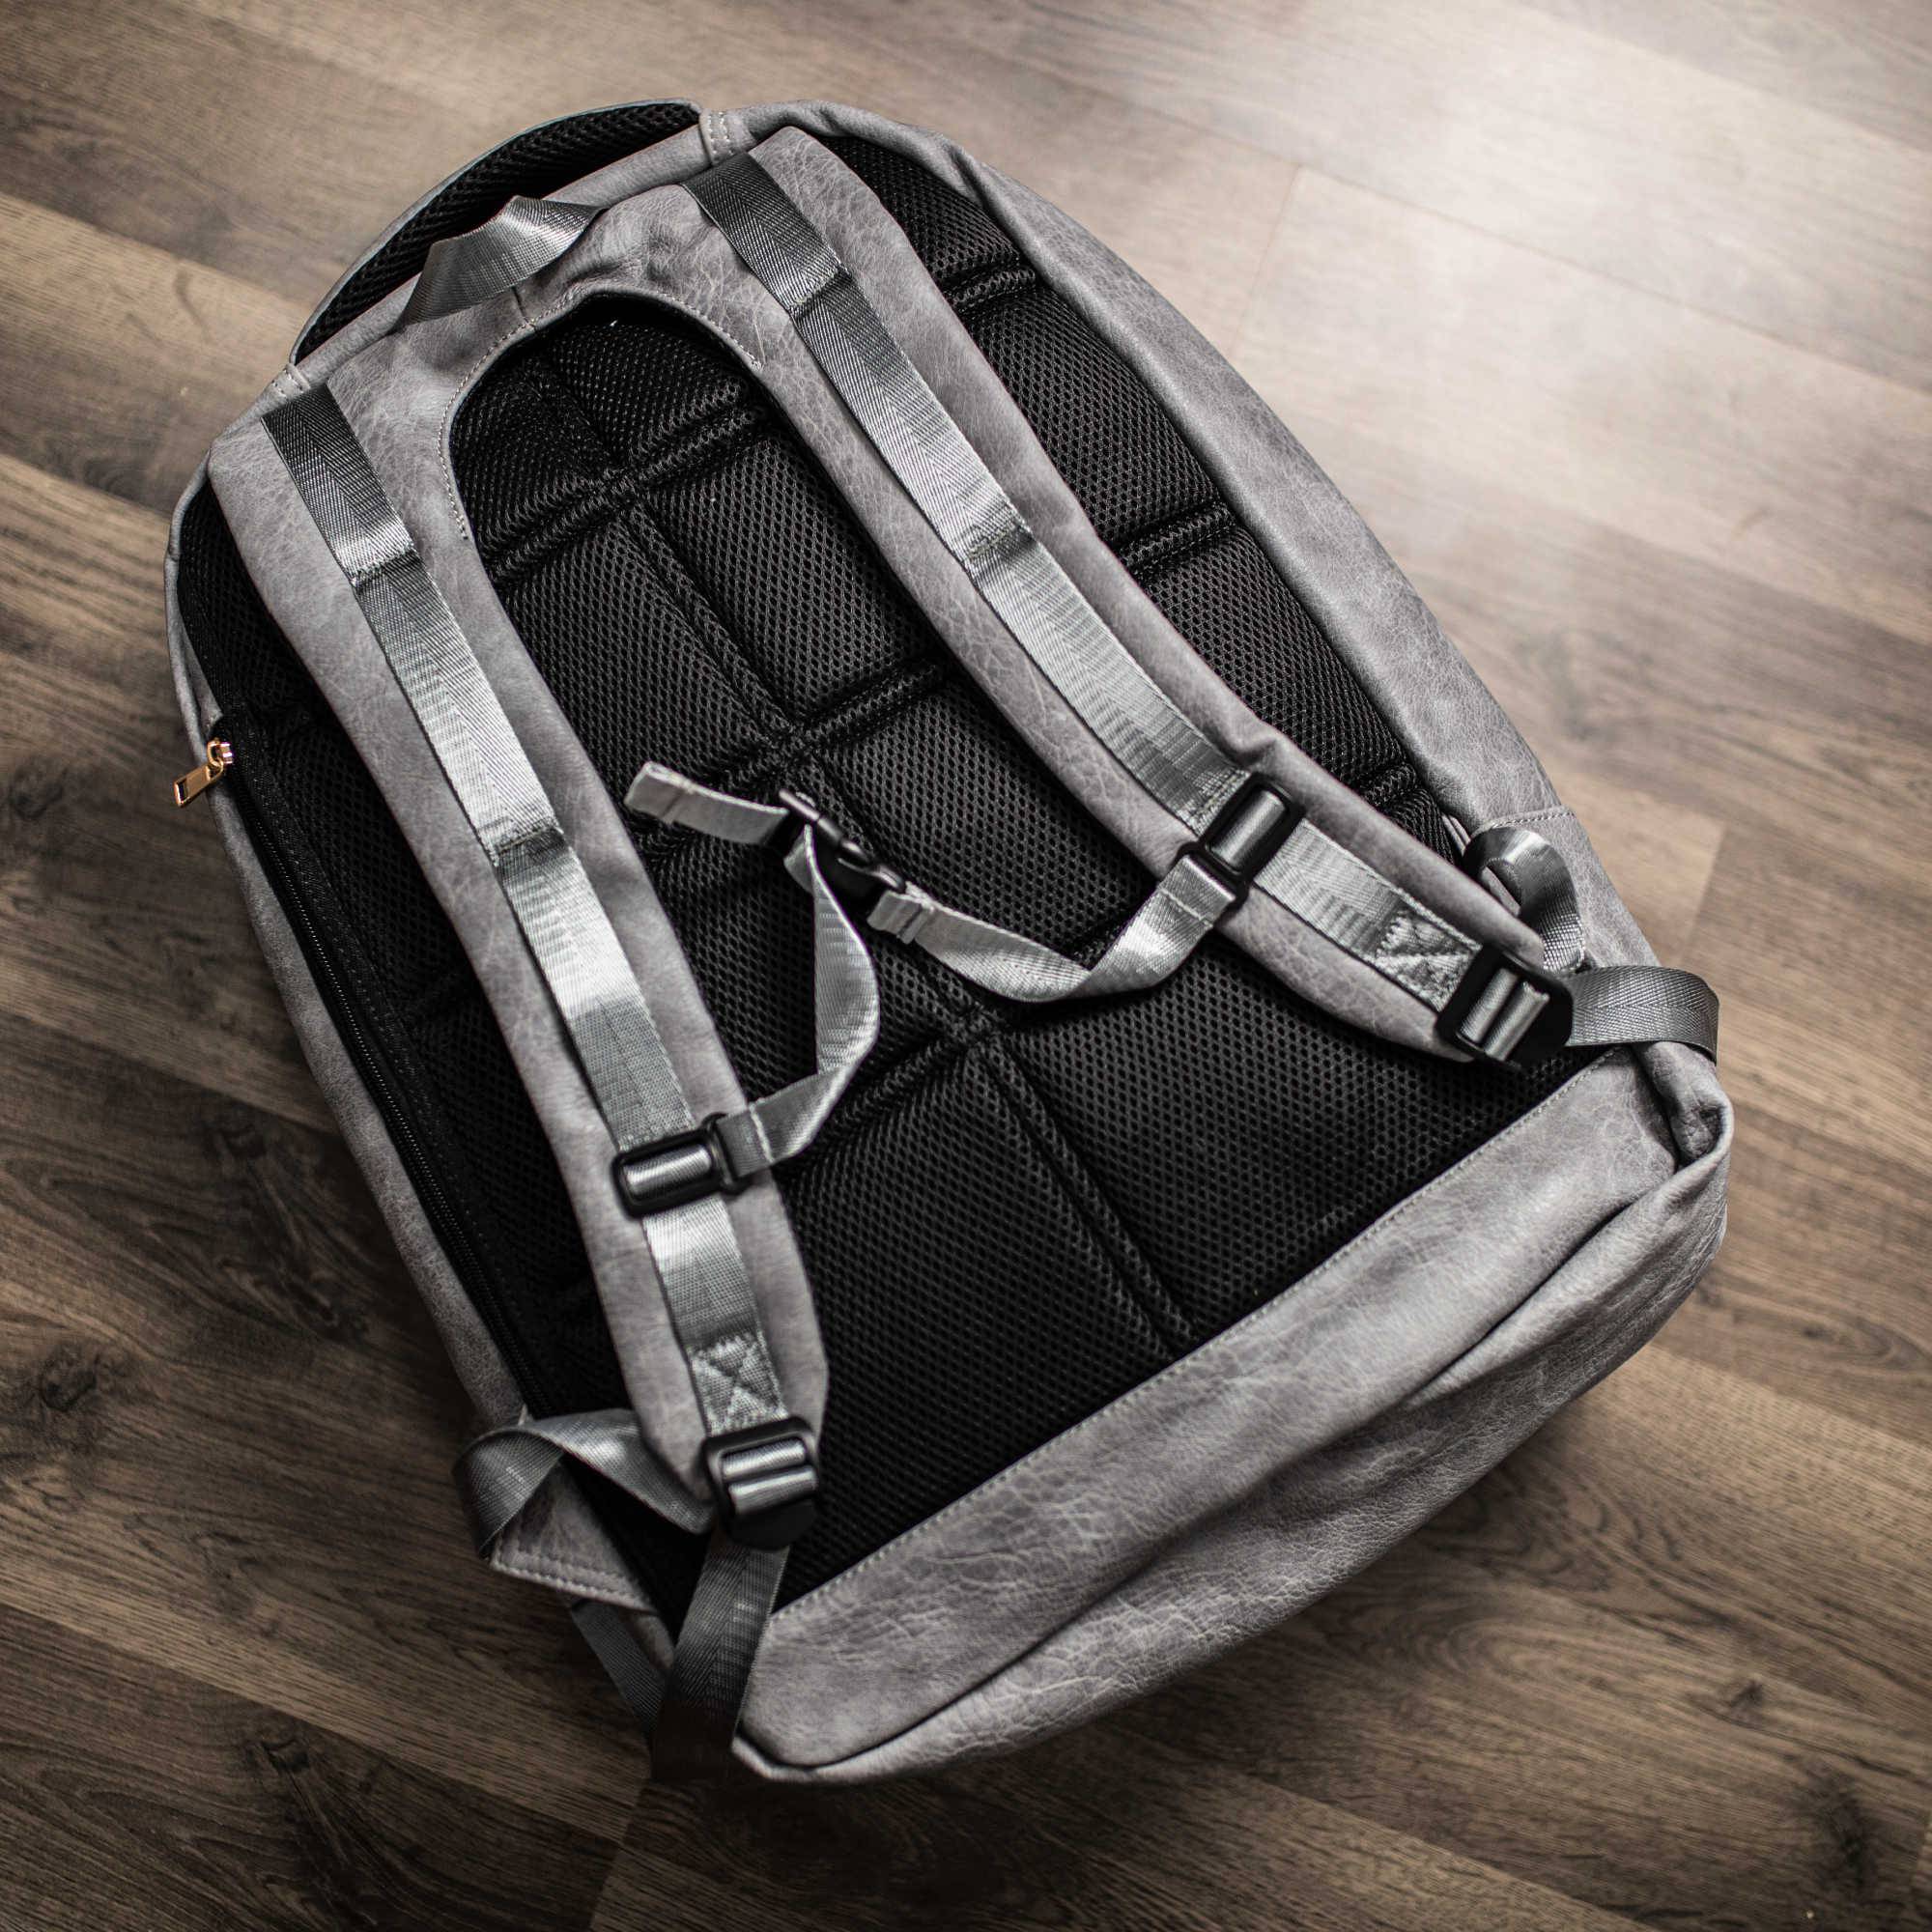 Grey Tumbled Leather Commuter Bag - Sole Premise